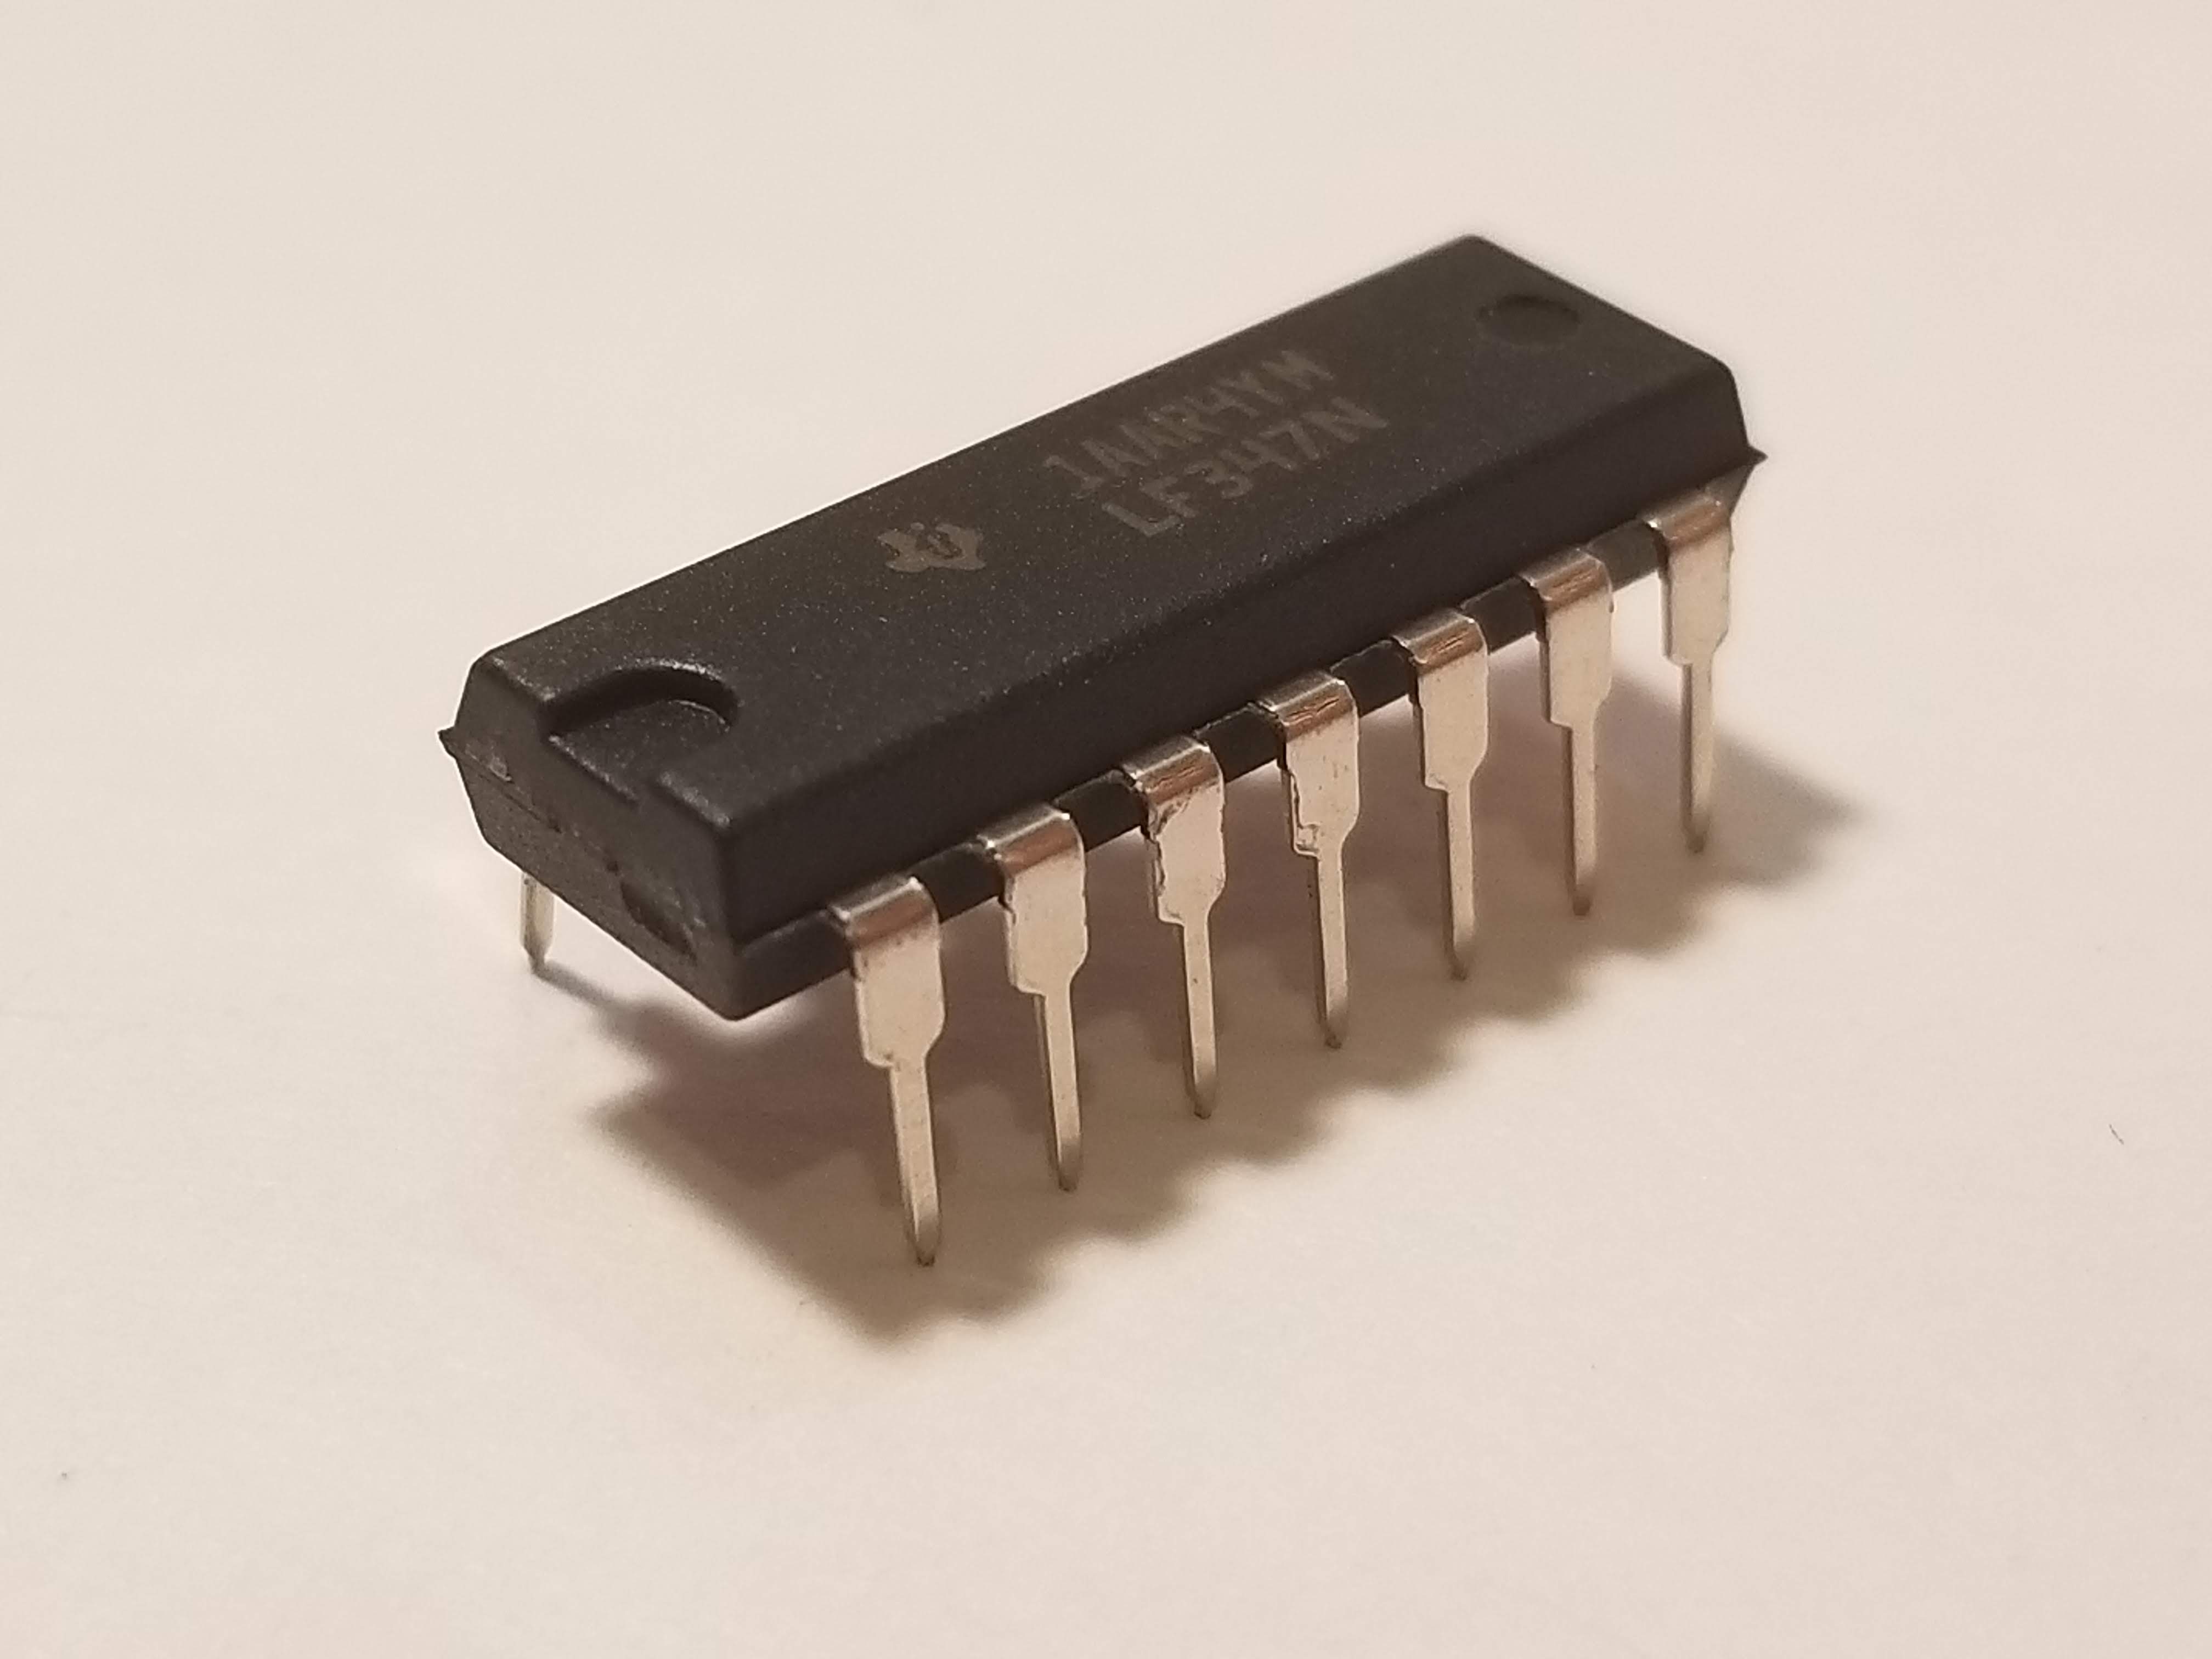 Picture of LM347 Quad Op-Amp